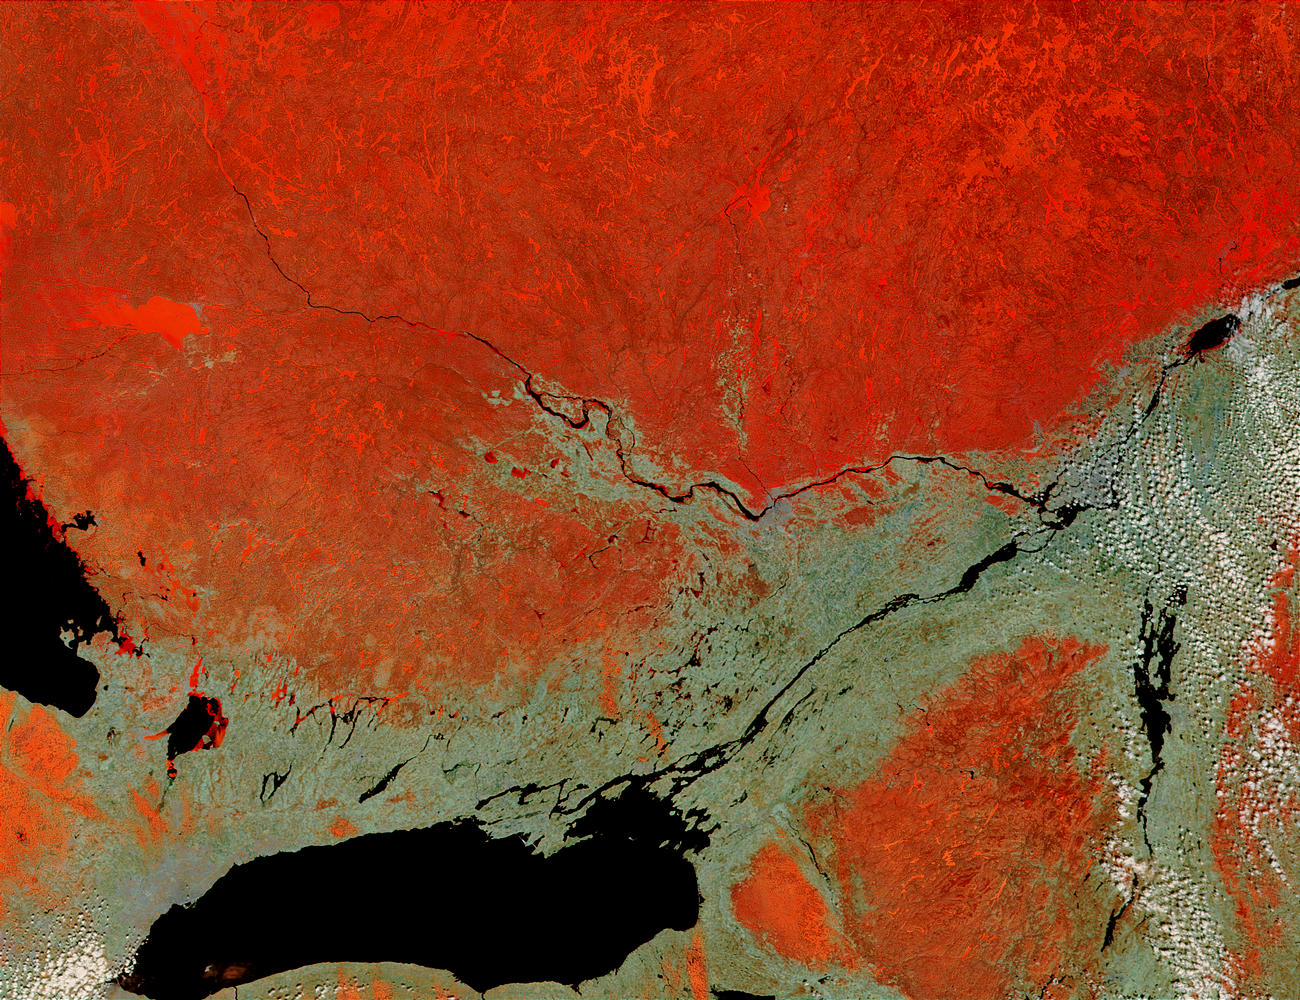 Lake Ontario, St. Lawrence River and Ottawa River, Canada (false color) - related image preview